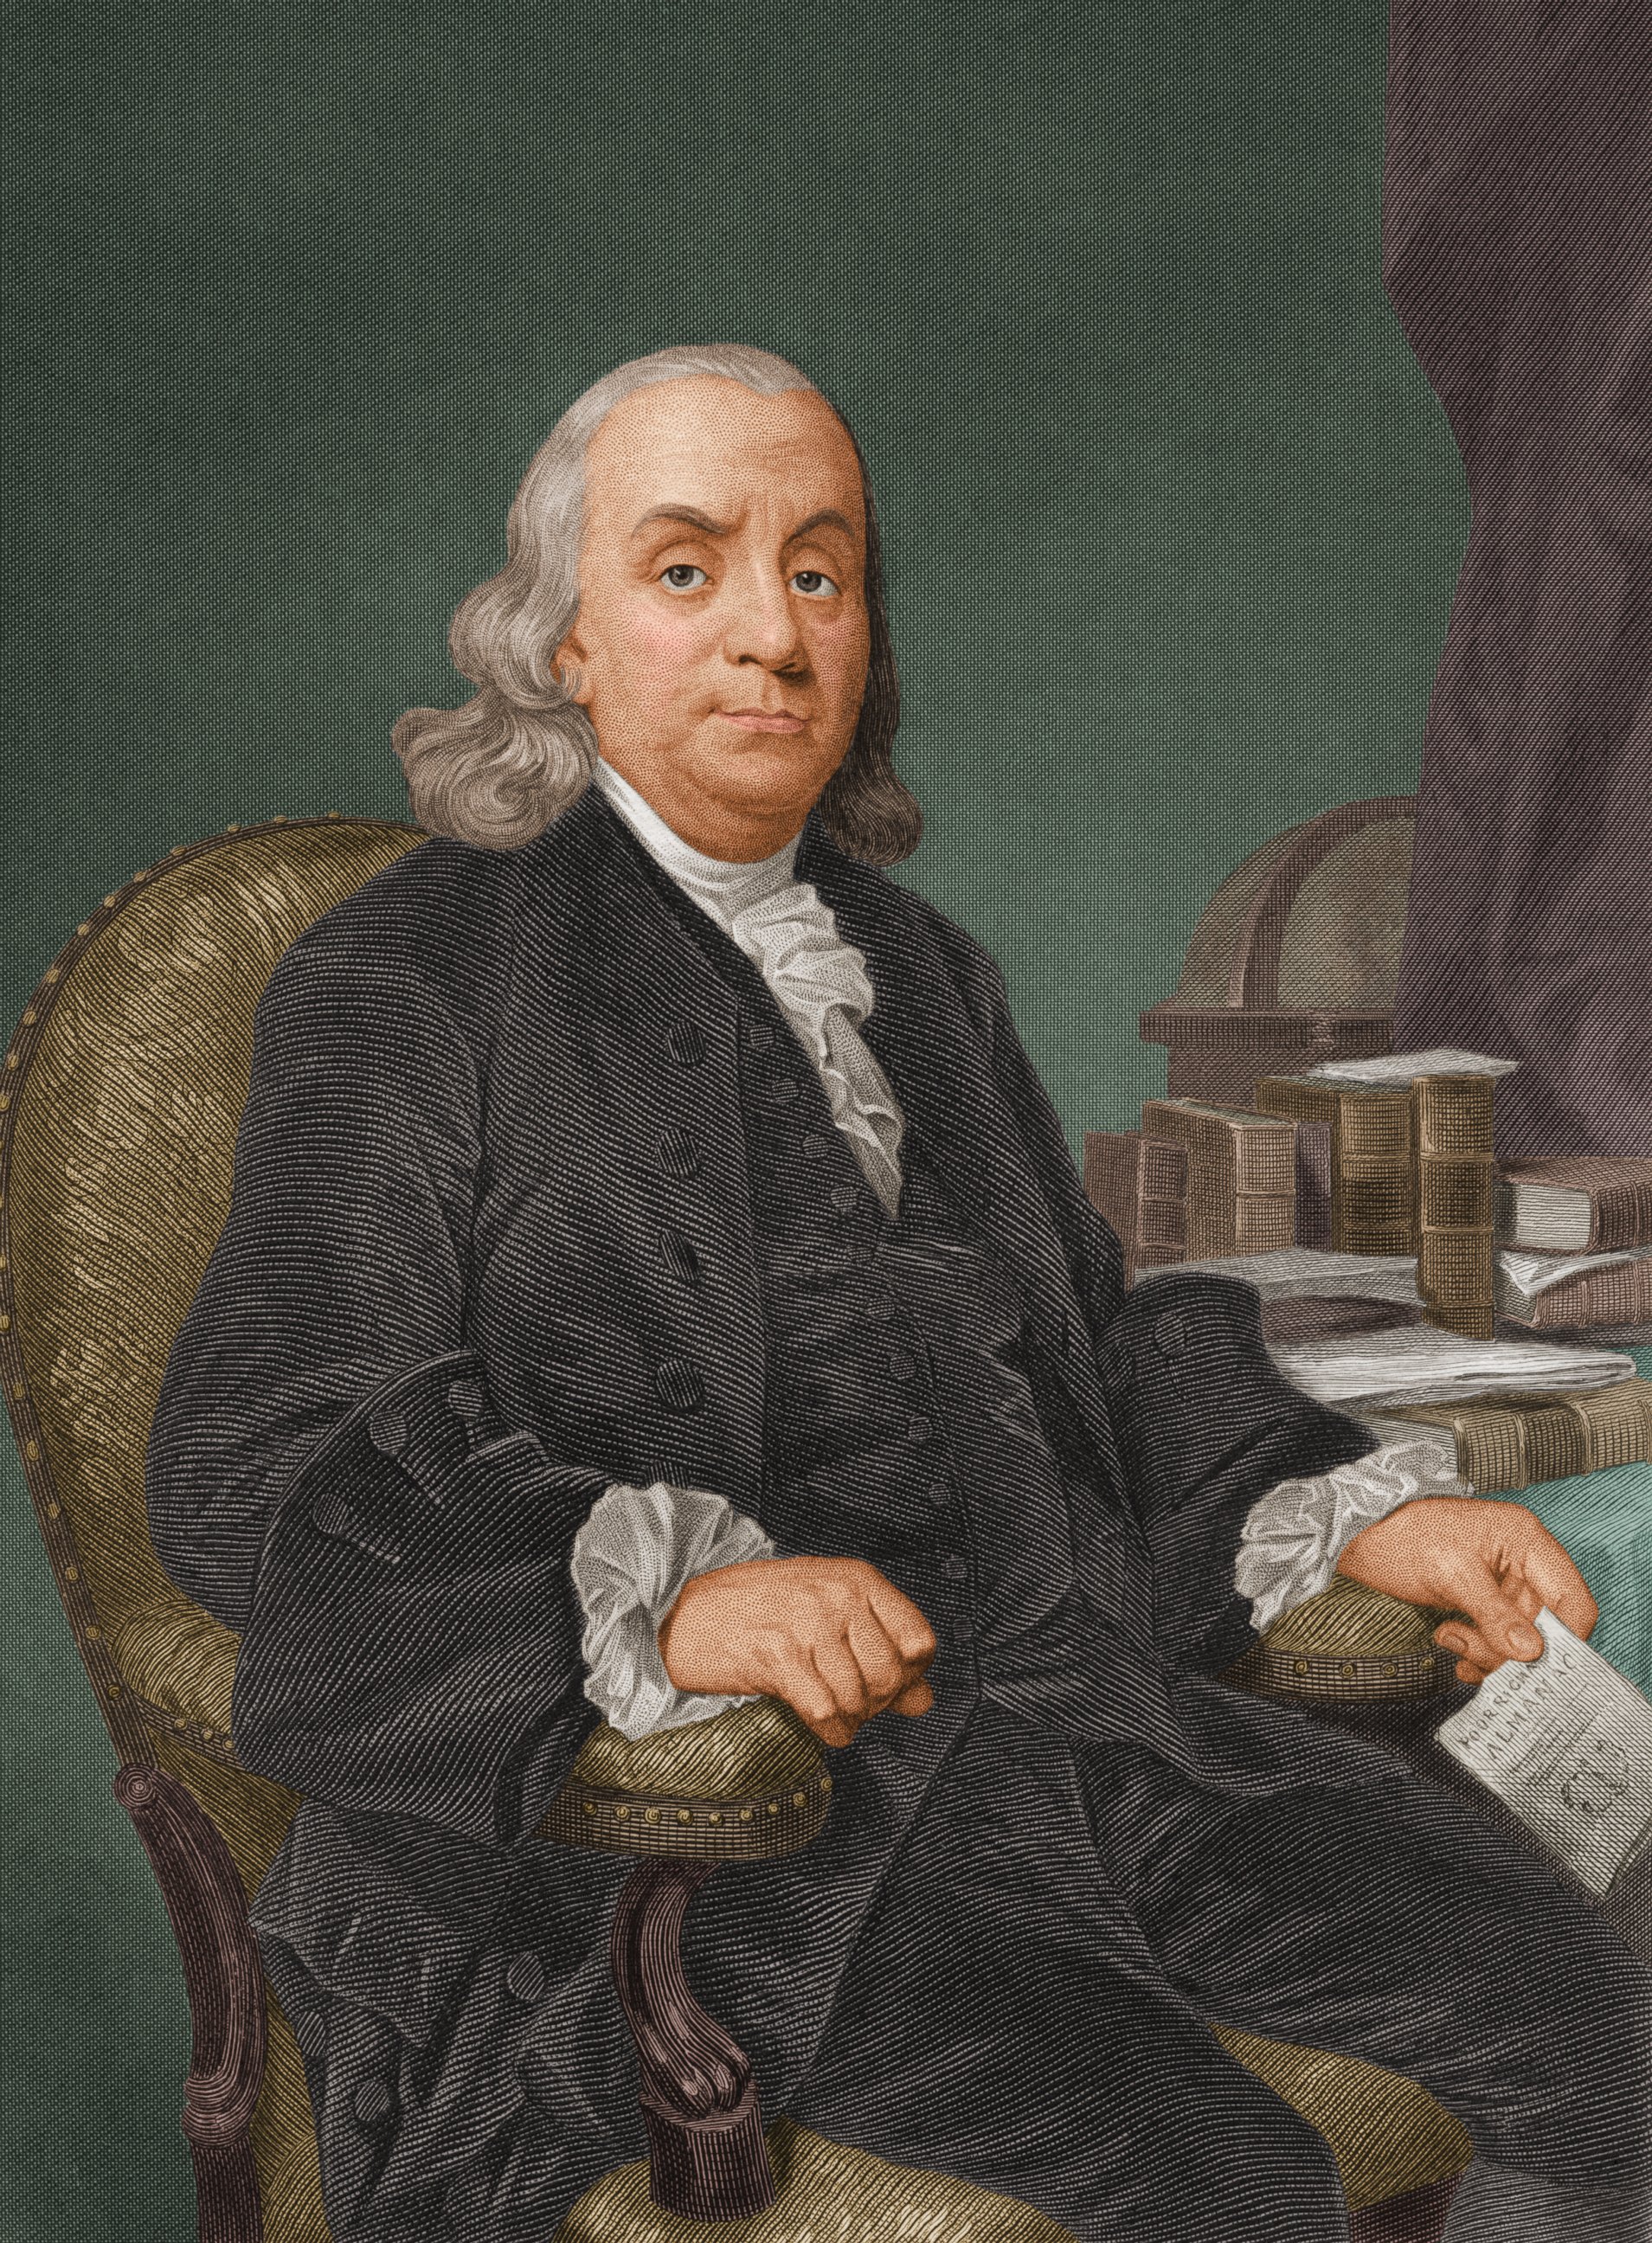 PHOTO: Benjamin Franklin slept from 10 p.m. until 5 a.m., according to author Mason Currey, who wrote a book about the daily rituals of geniuses.
